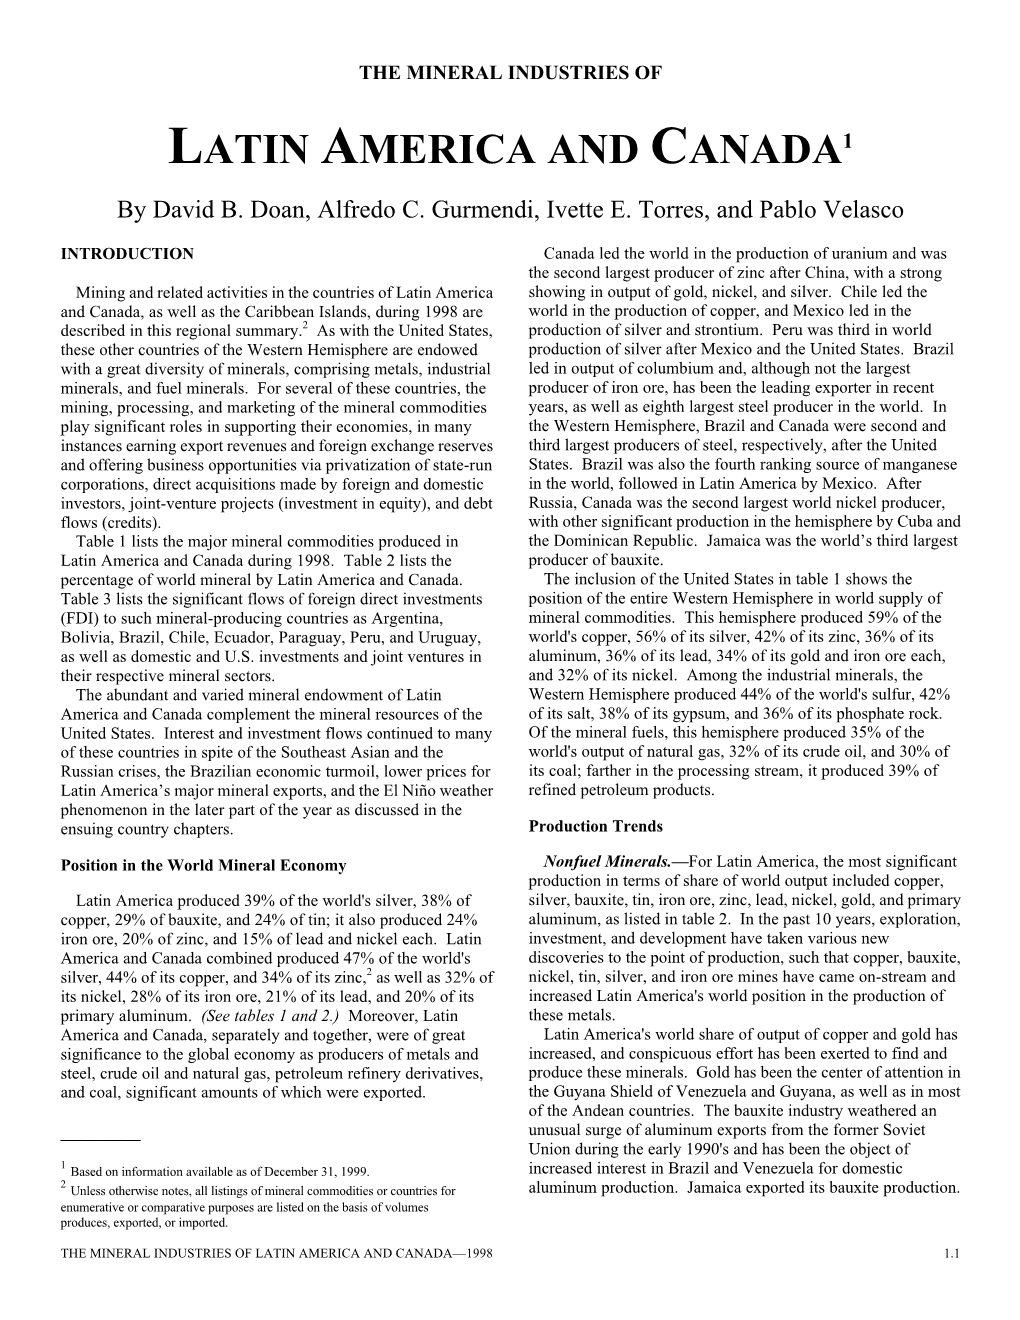 The Mineral Industries of Latin America and Canada in 1999